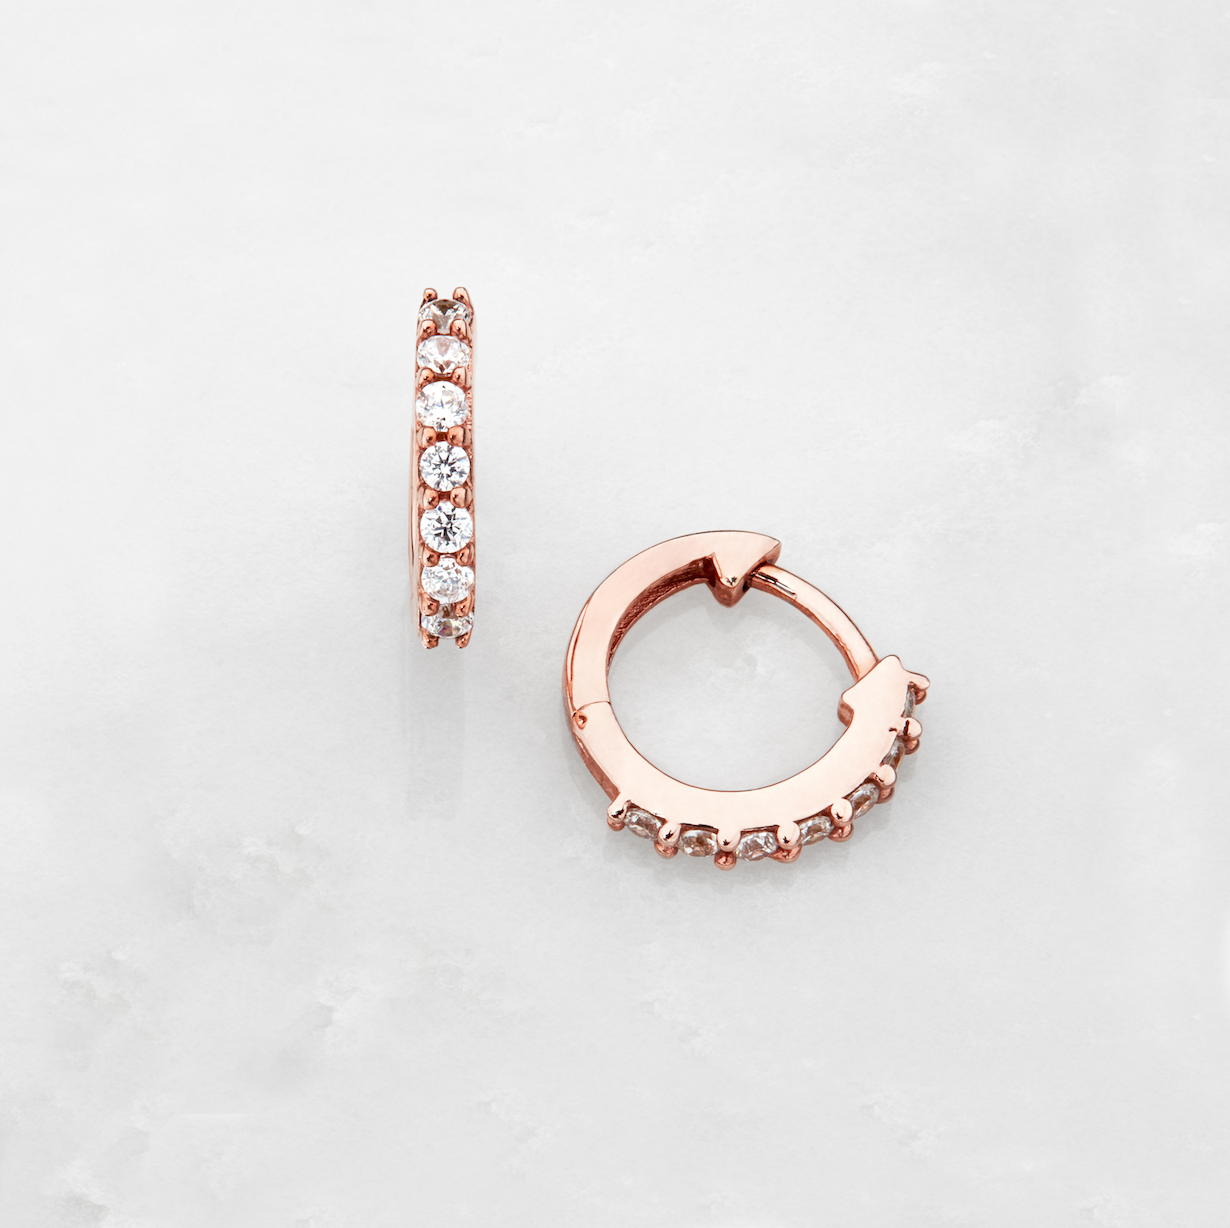 Rose gold huggie pearl drop earrings on a marble surface